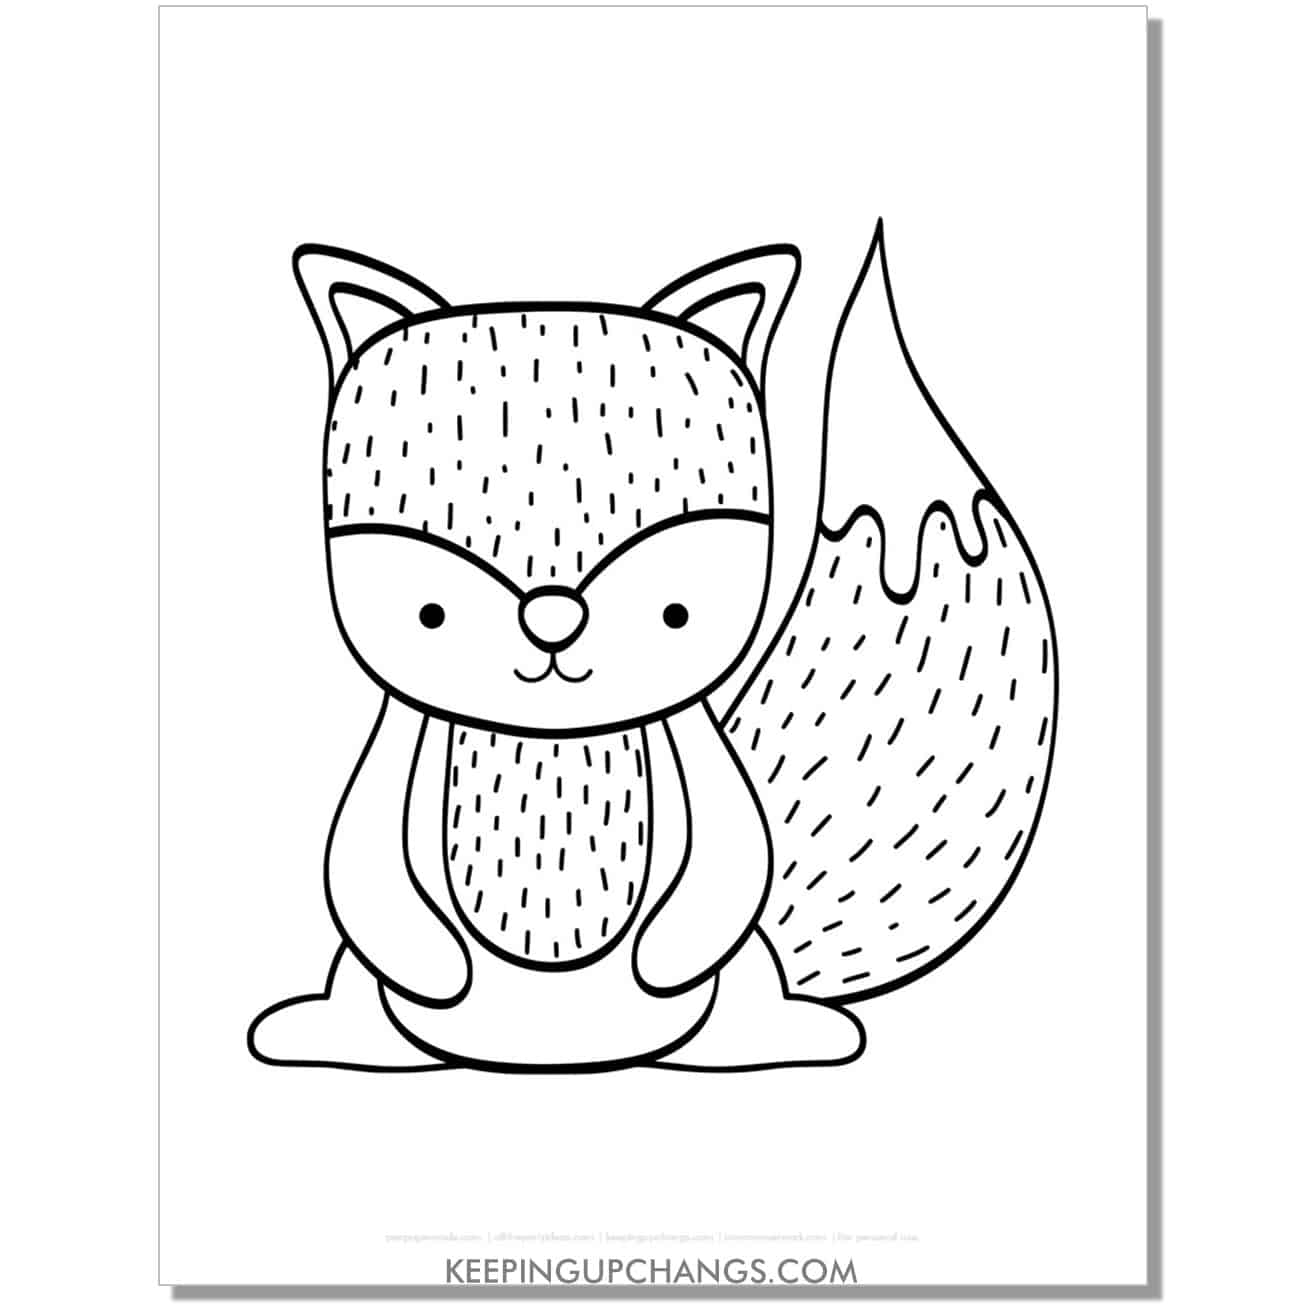 free cute, adorable baby squirrel coloring page, sheet.